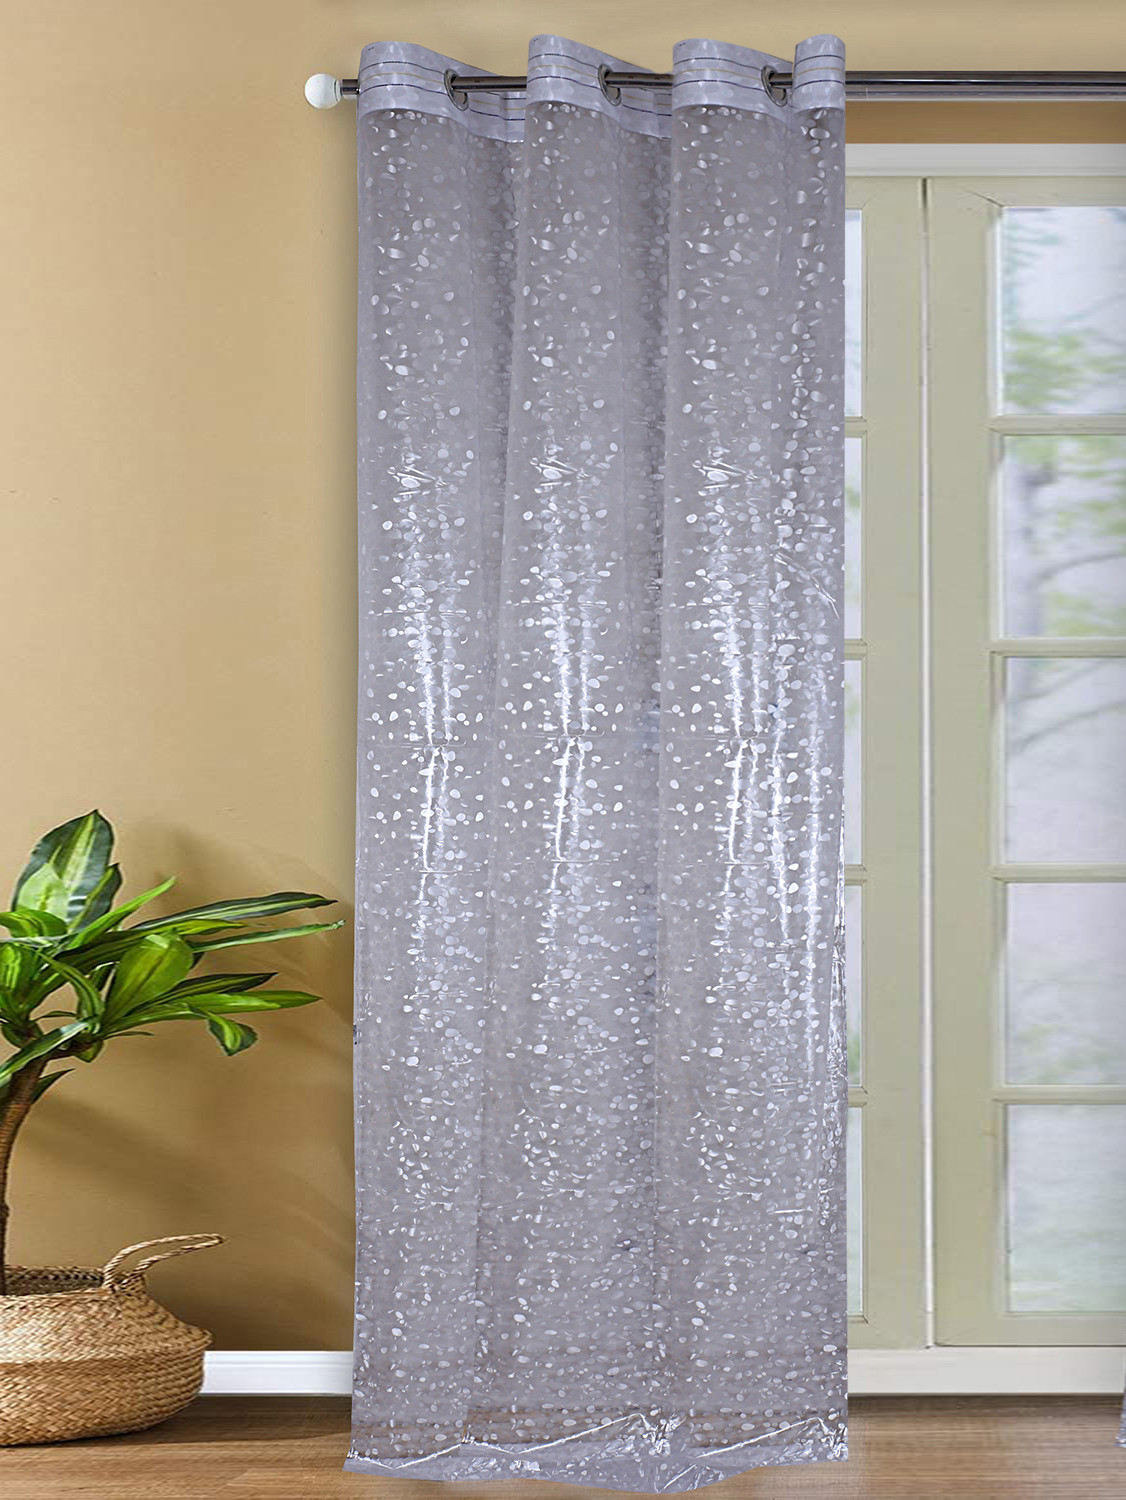 Kuber Industries Stone Print Stain-Resistant & Waterproof PVC AC Curtain For Home, office, restaurant 7 Feet With 6 Grommets (Transparent)